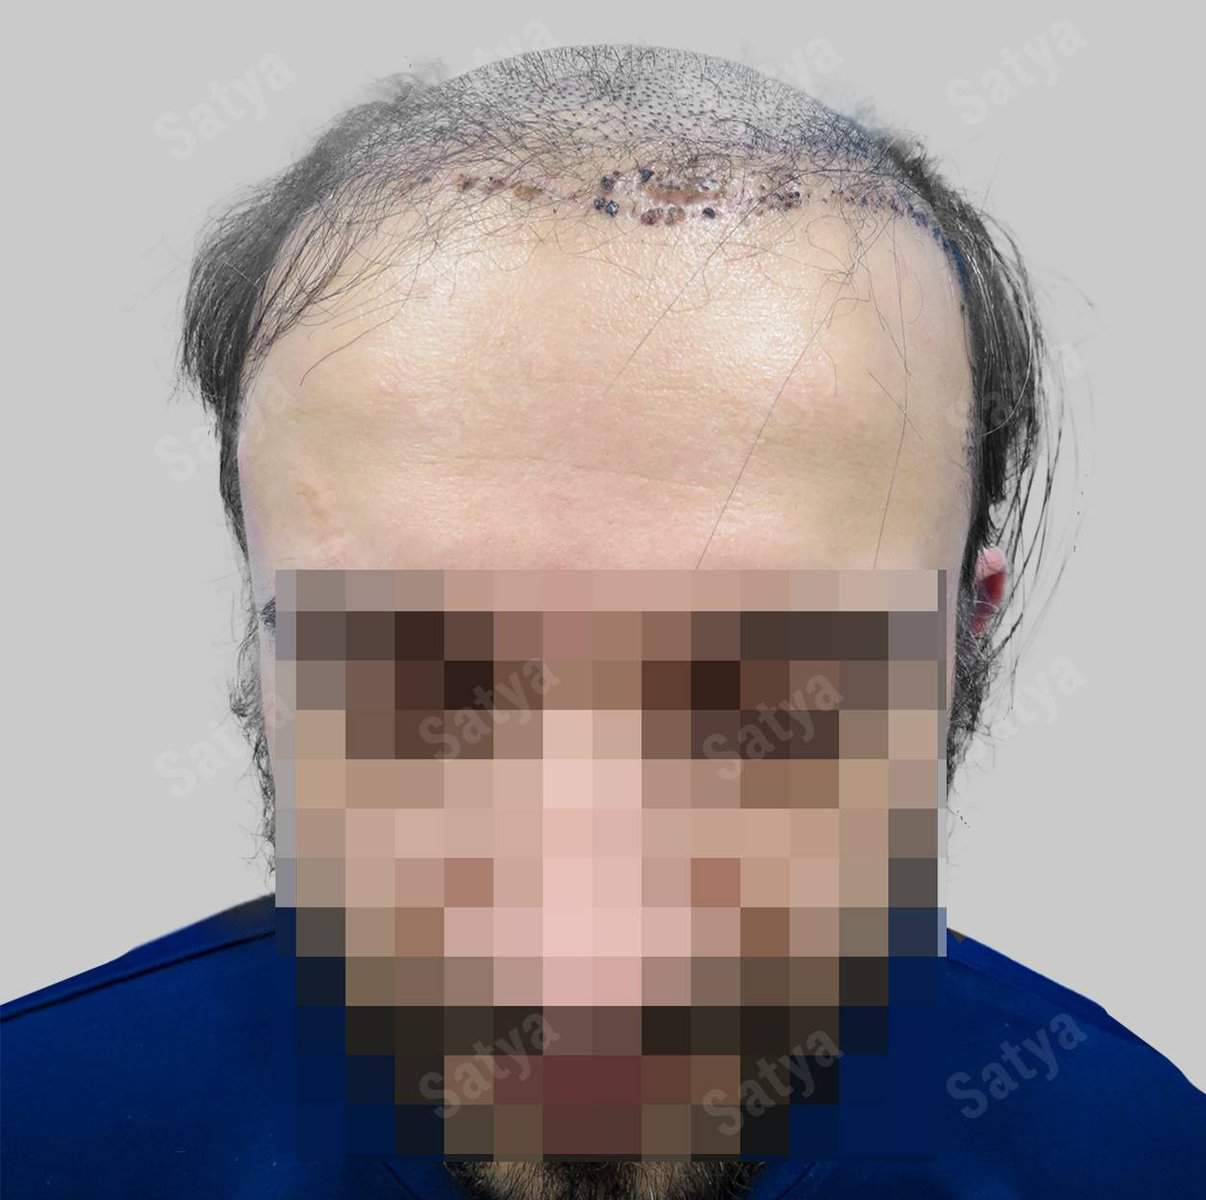 Hair Transplant for Men | before and after